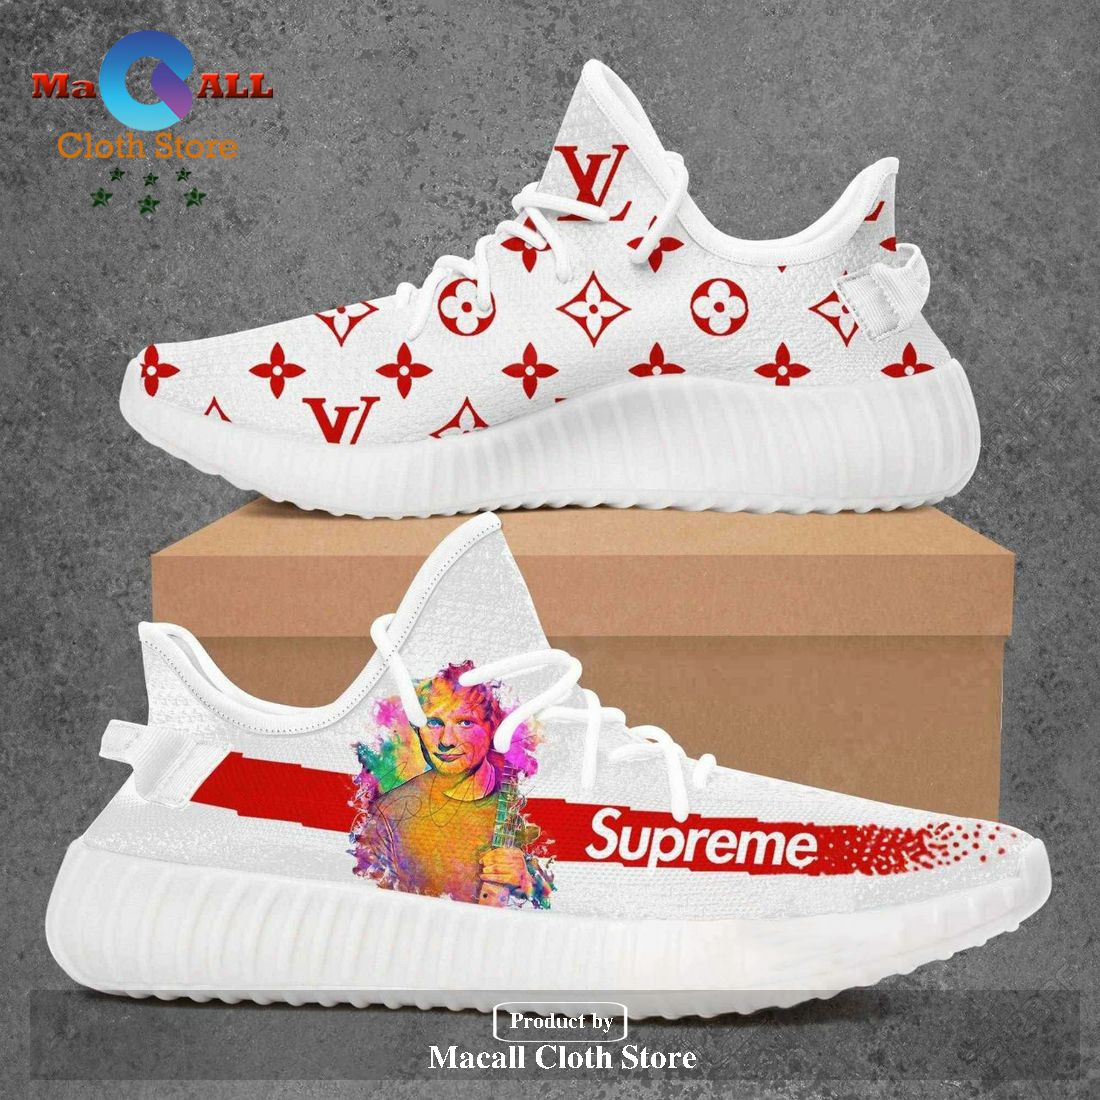 Louis Vuitton Supreme Ed Sheeran Yeezy Boost Shoes Sport Sneakers Luxury  Brand For Men And Women - Macall Cloth Store - Destination for fashionistas